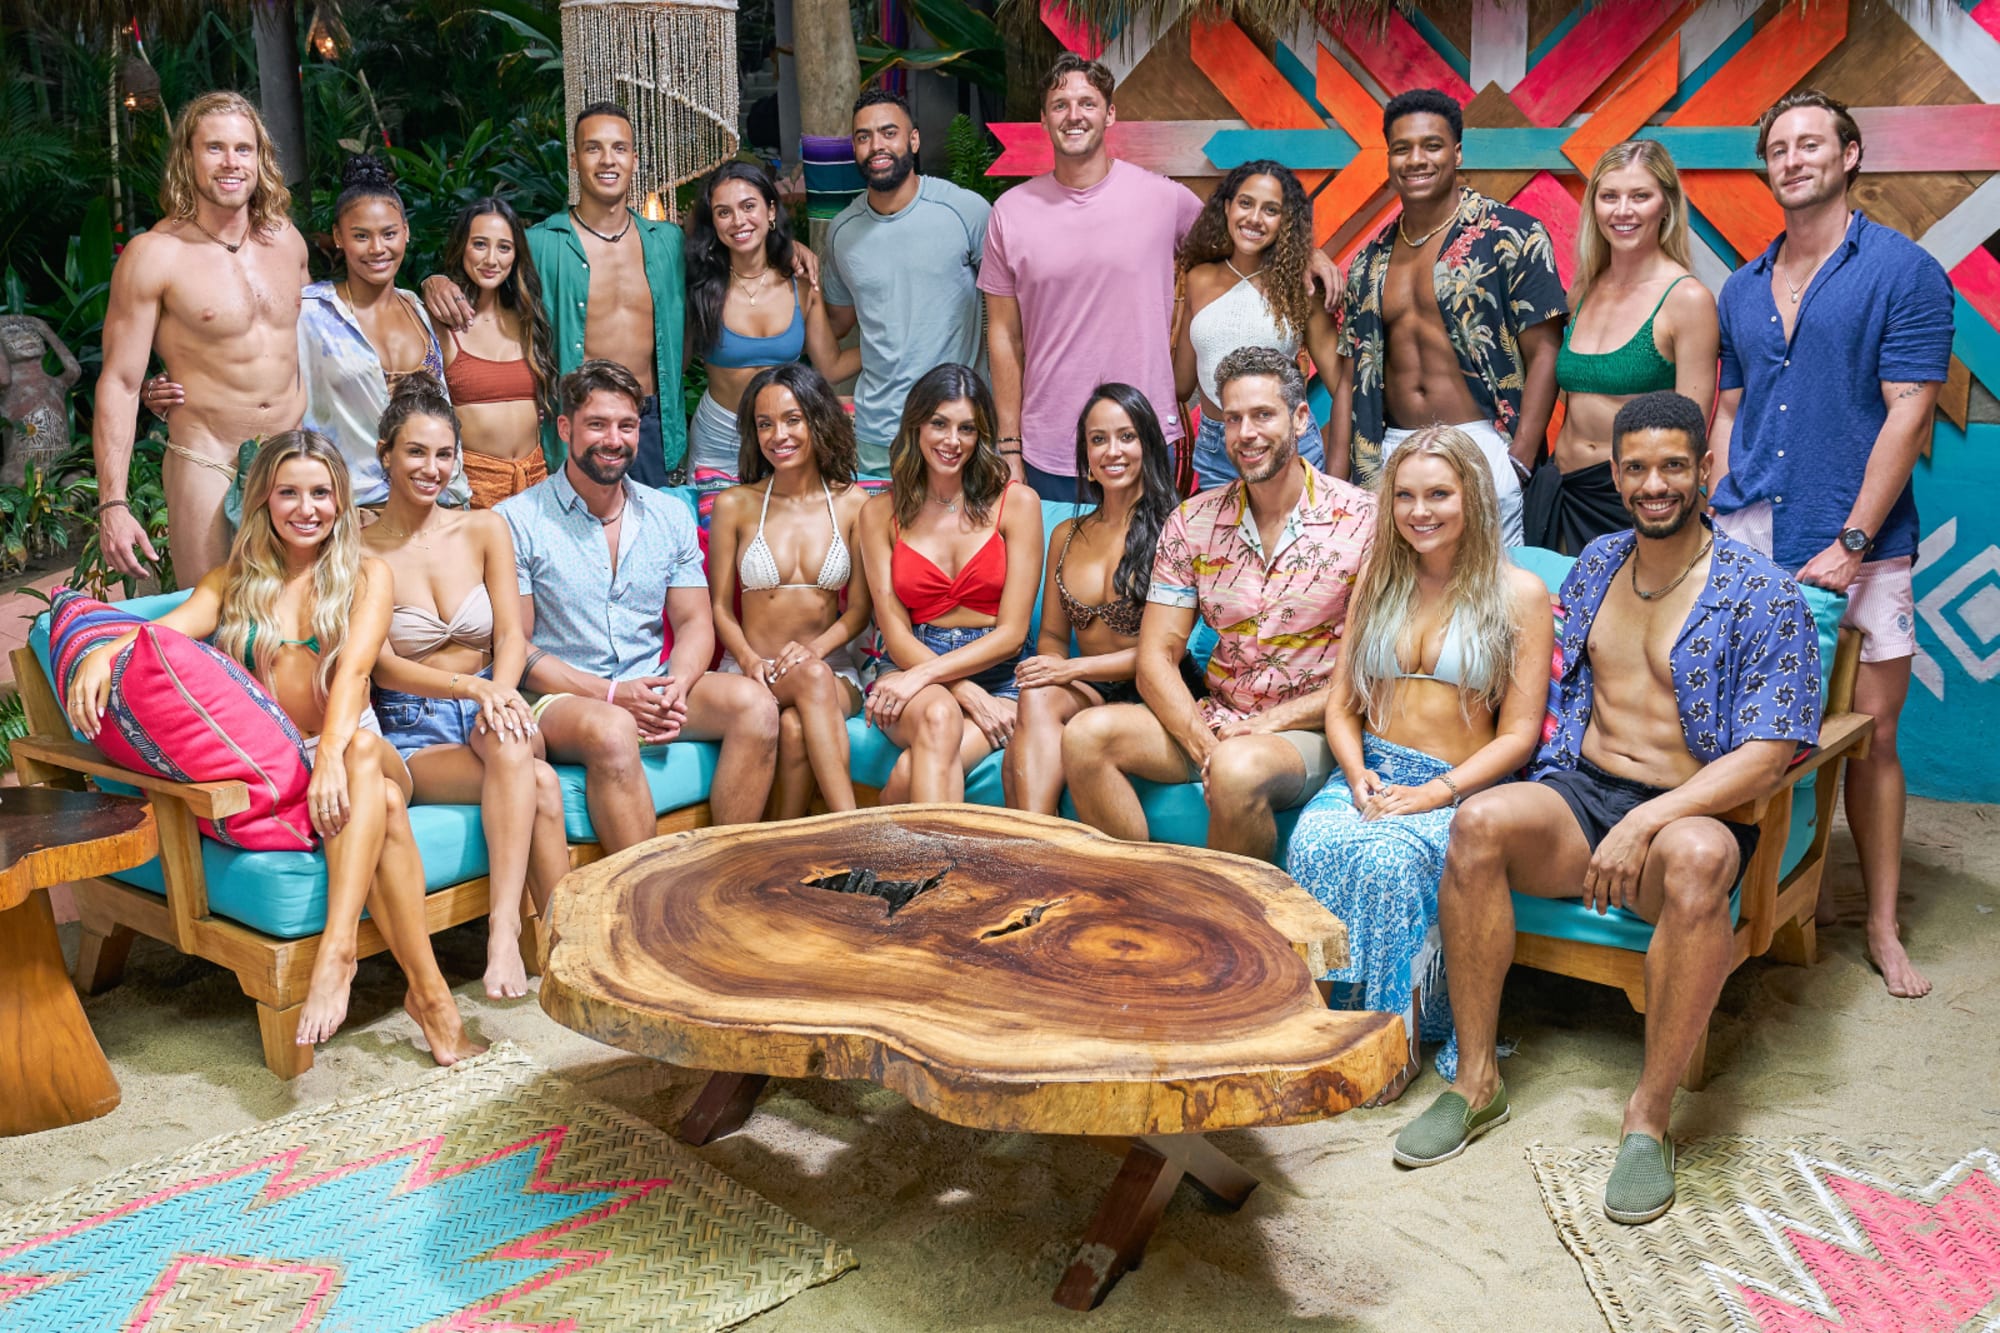 Bachelor in Paradise Season 8, Episodes 15 & 16 Heroes and Villains